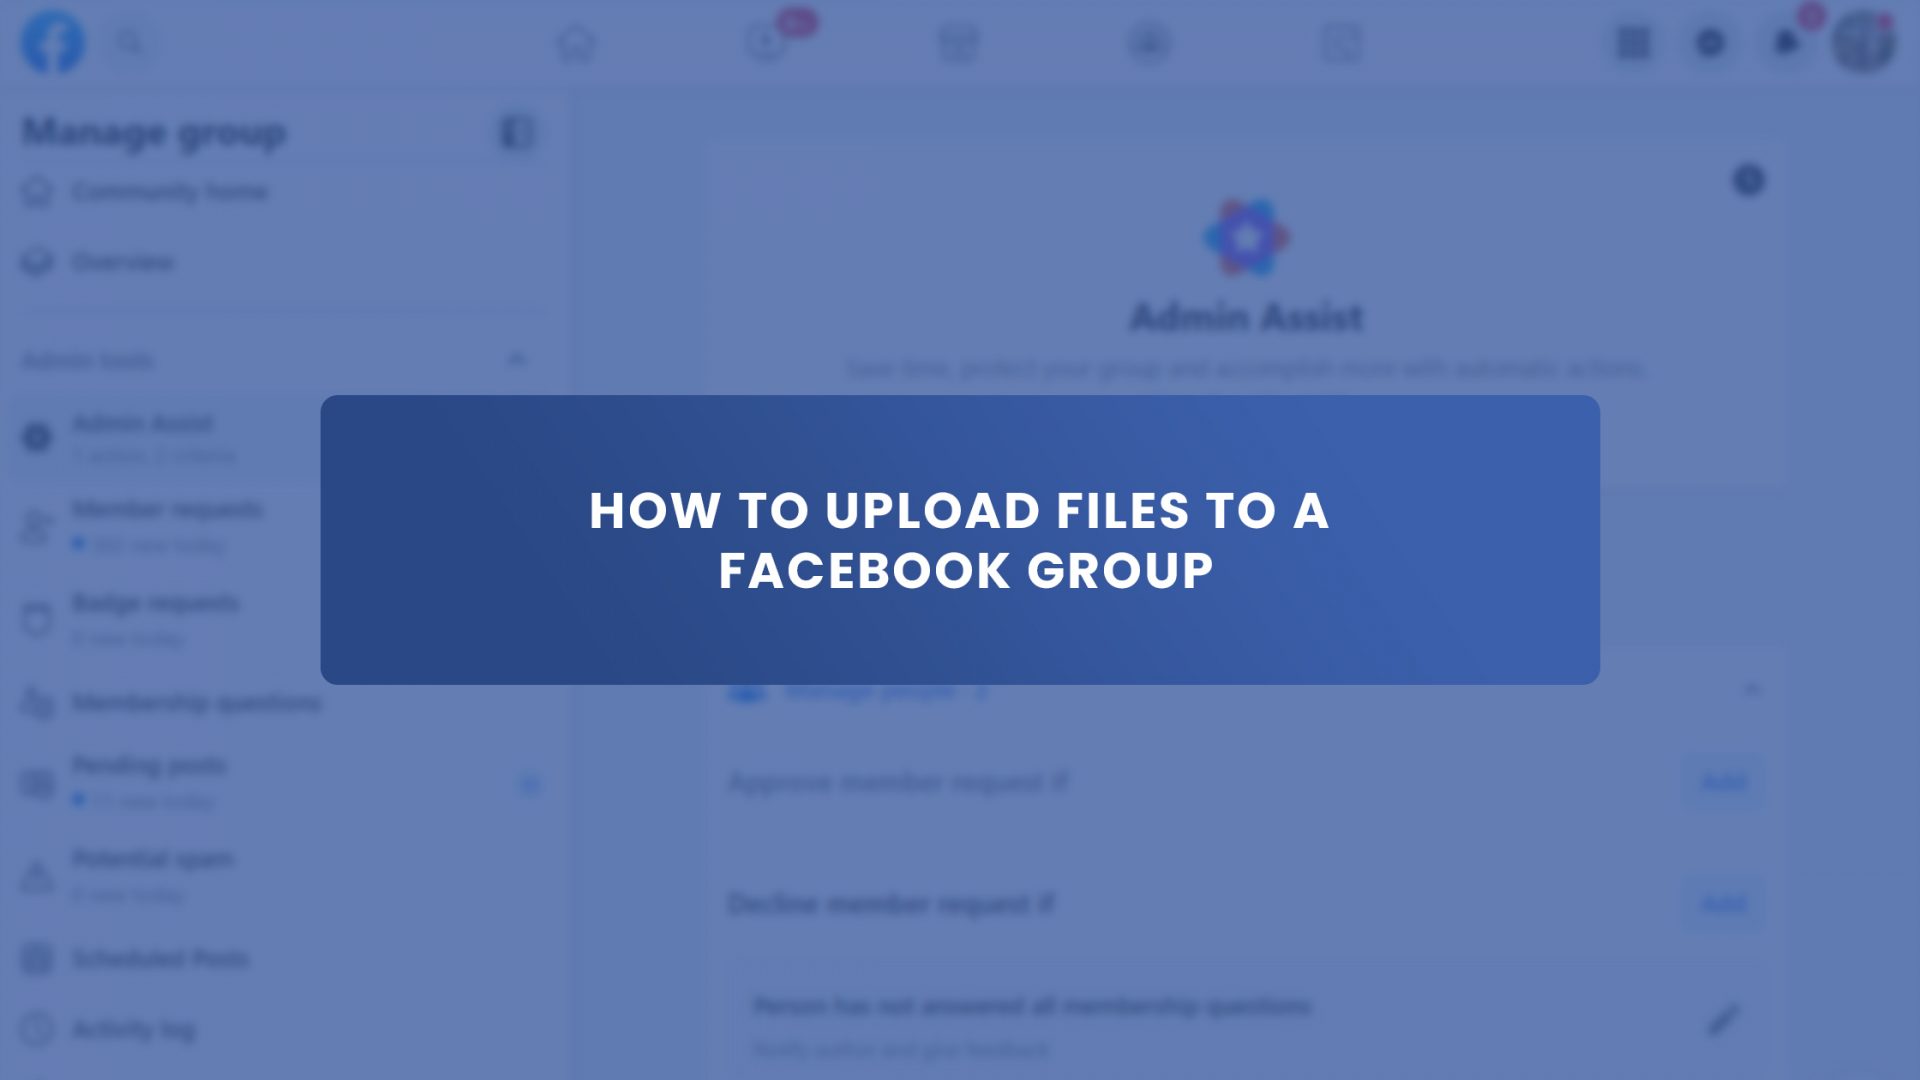 How to Upload Files to Facebook Group